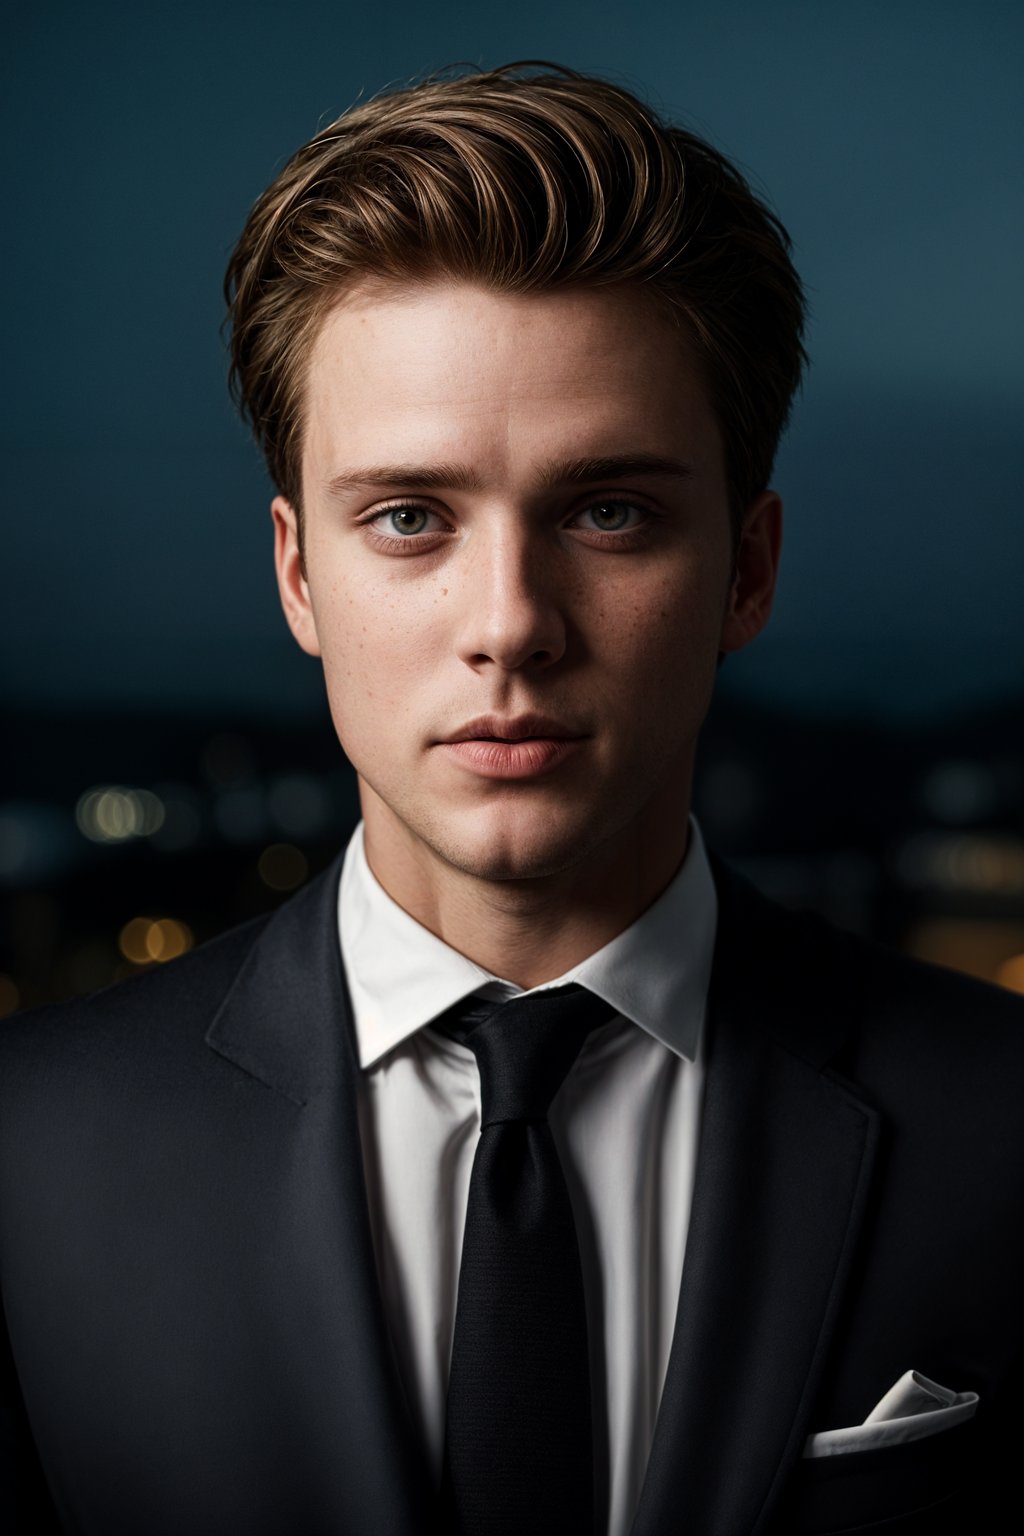 man with enticing gaze, adorned with  sharp, stylish suit against a twilight backdrop